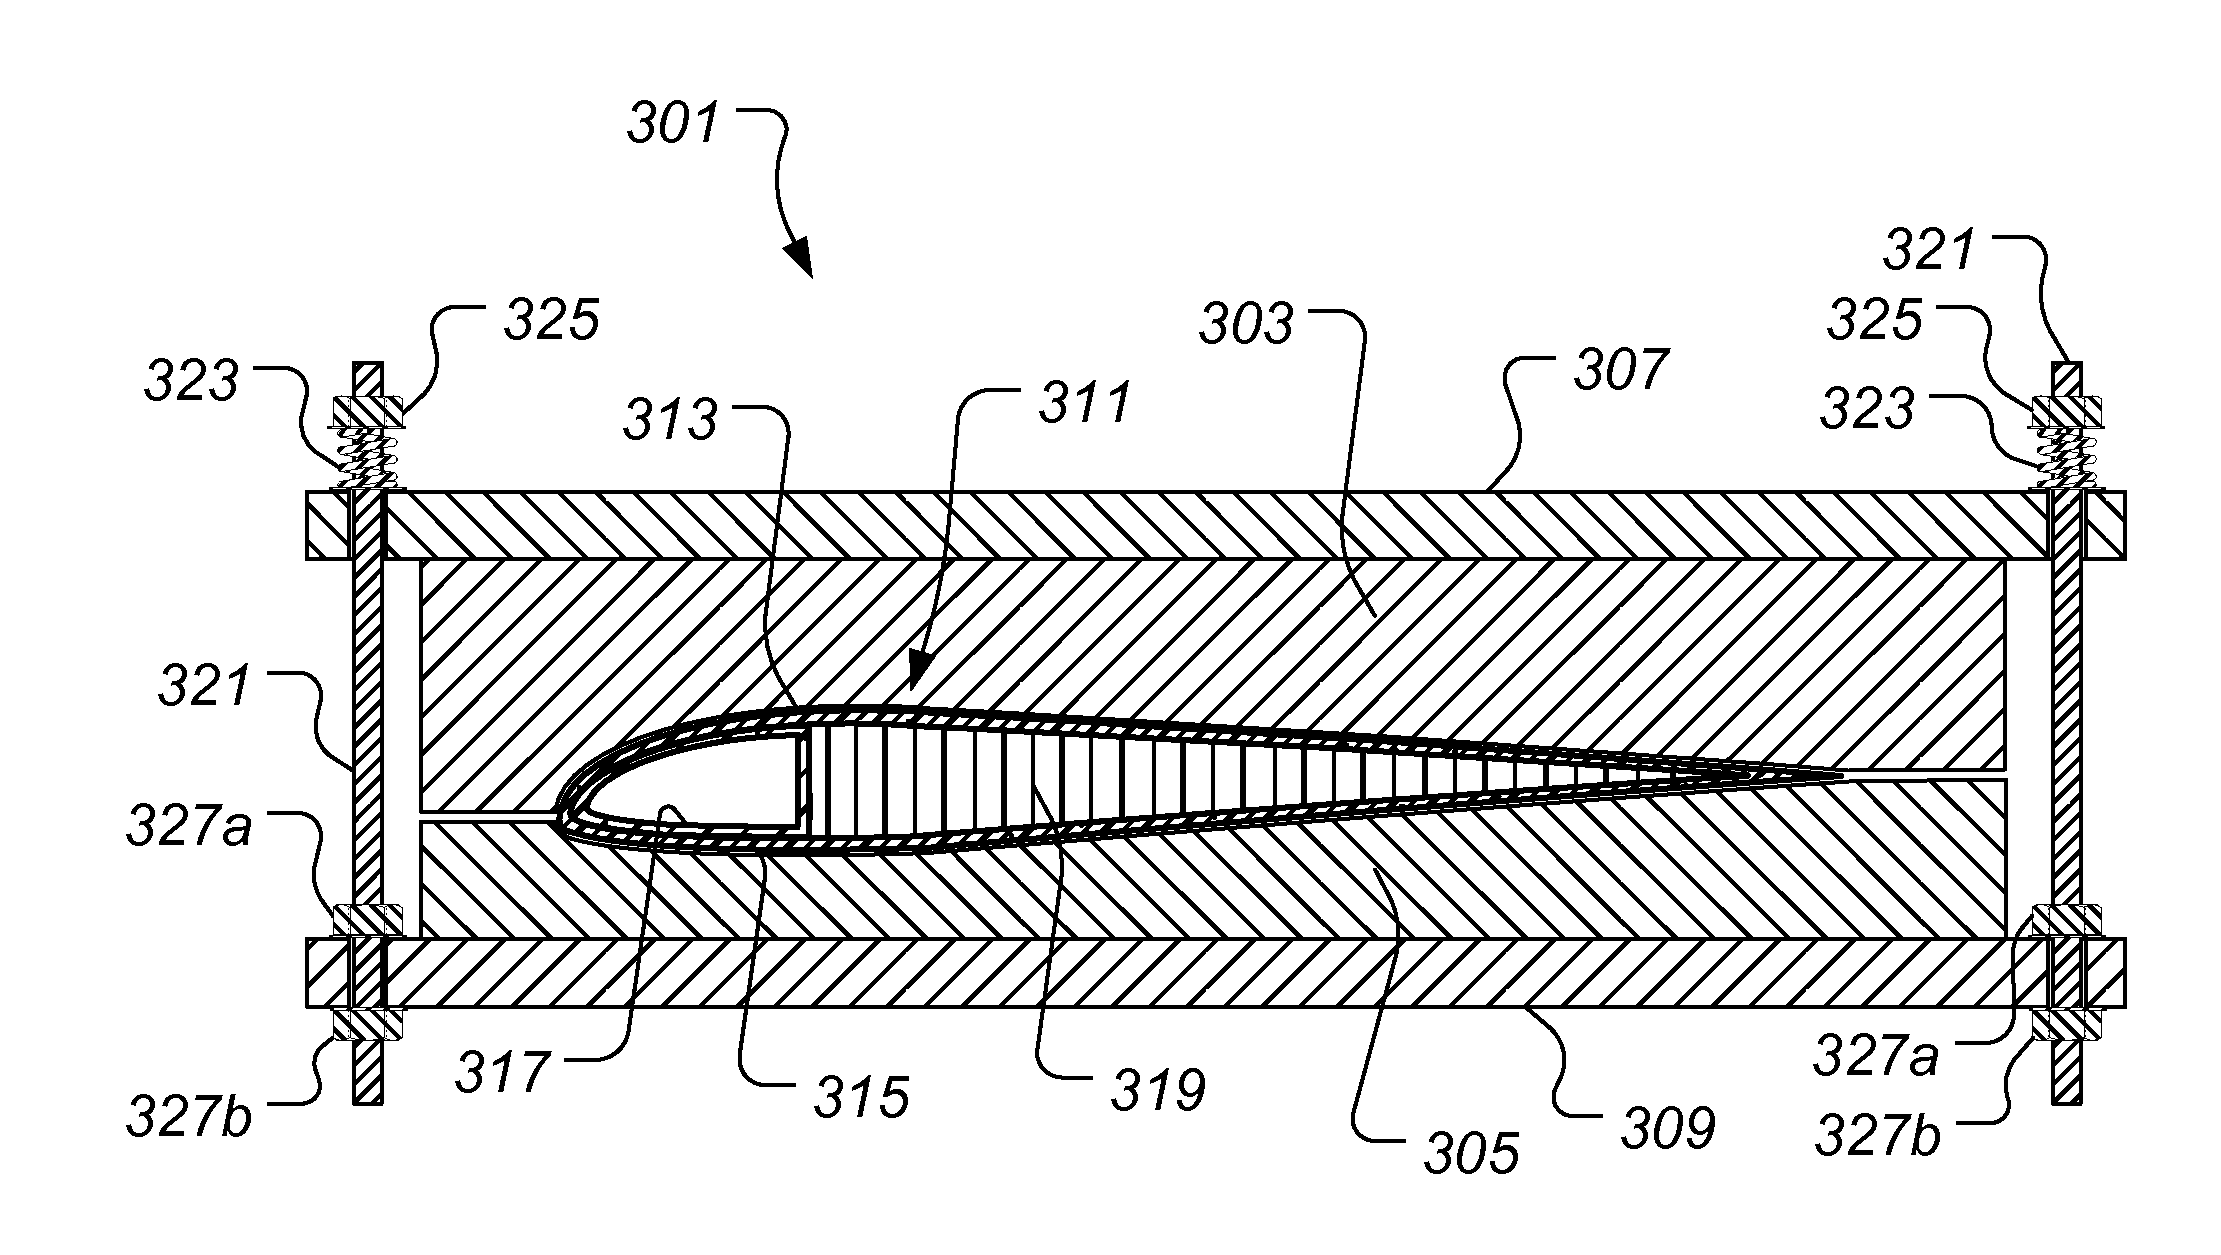 System and Method of Manufacturing a Composite Structure in a Closed Cavity Mold